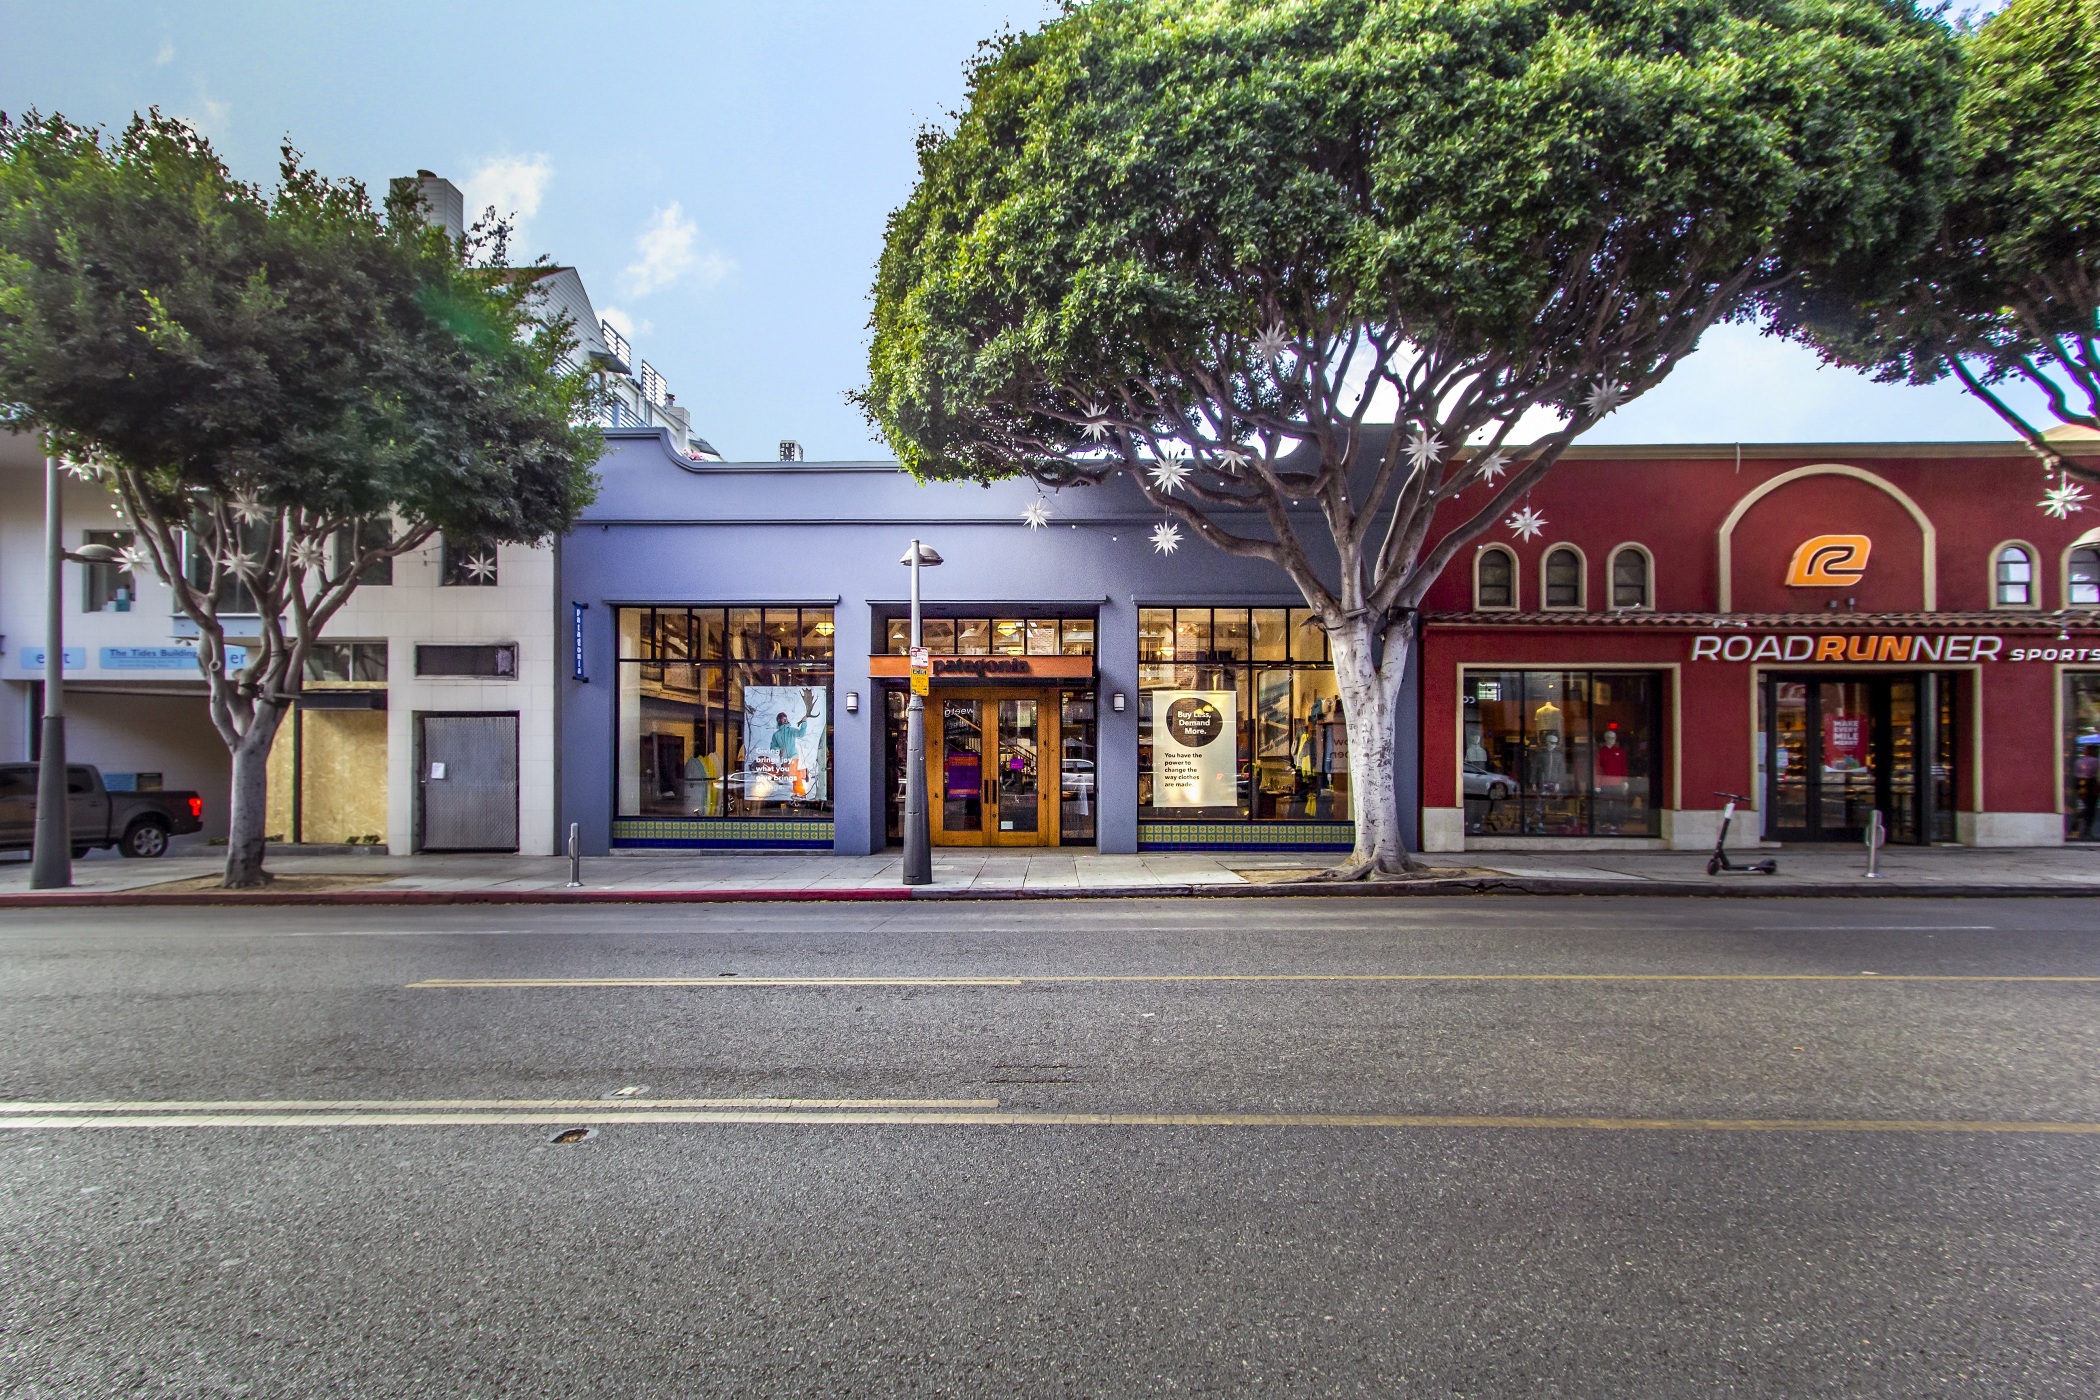 Patagonia previously occupied a roughly 11,500-square-foot 1344 4th St. store in Santa Monica before moving to a more desirable location nearby during the pandemic. (CoStar)